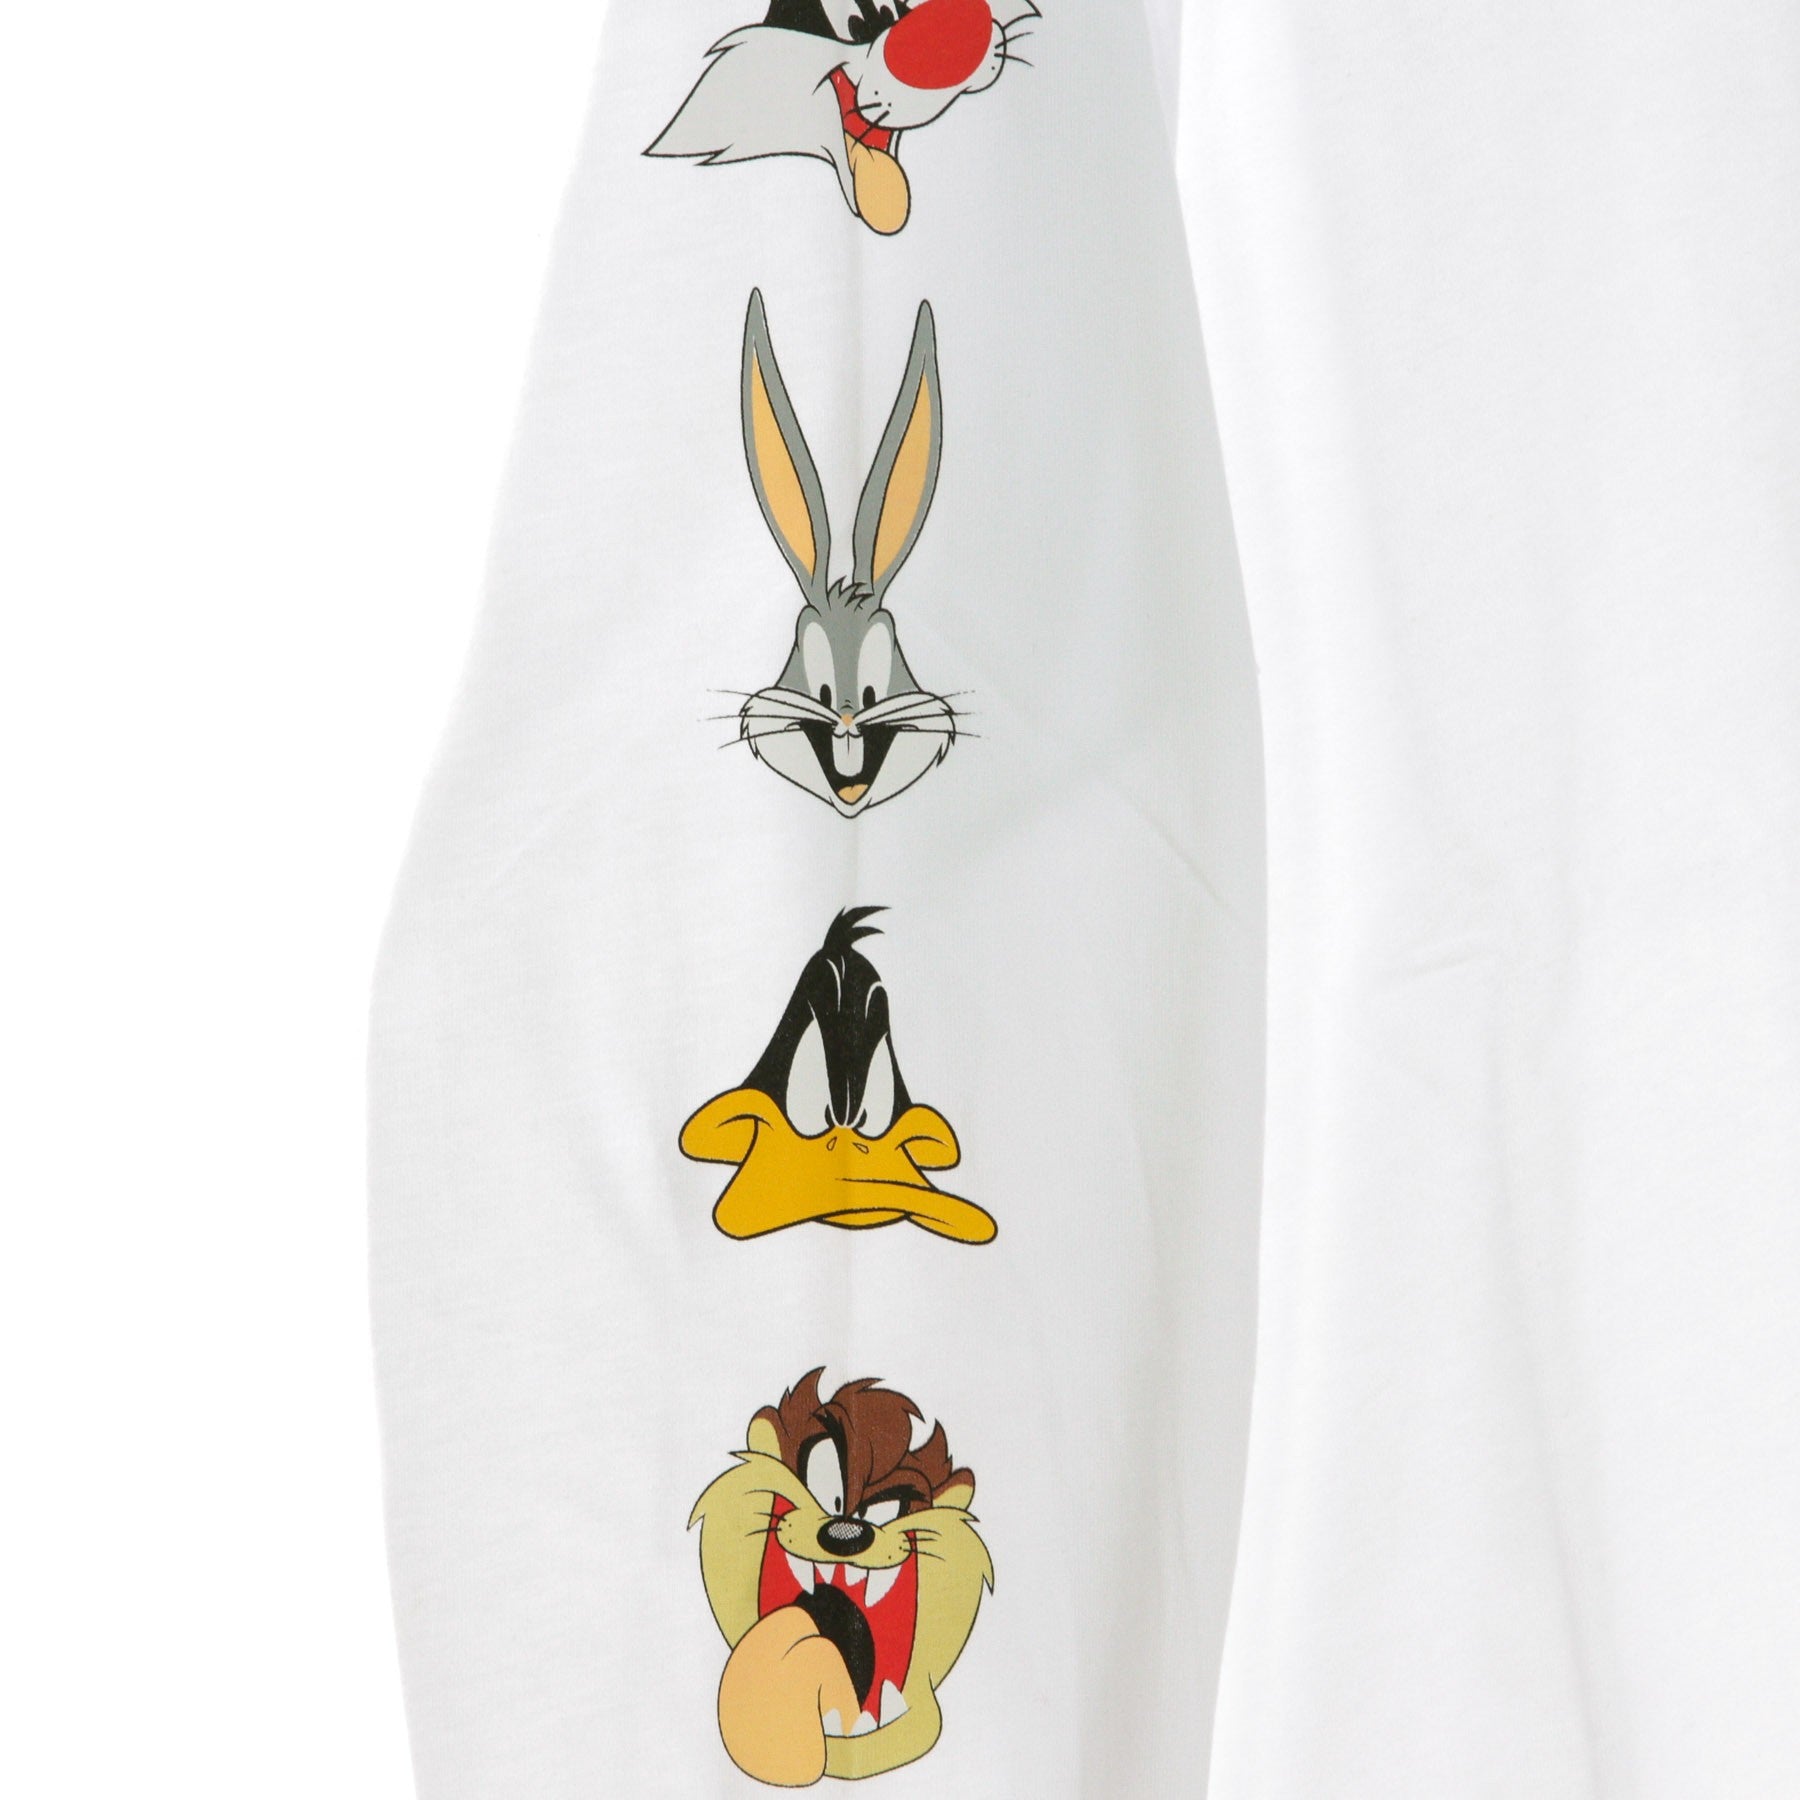 Tommy Women's Long Sleeve T-Shirt L/s X Looney Tunes White